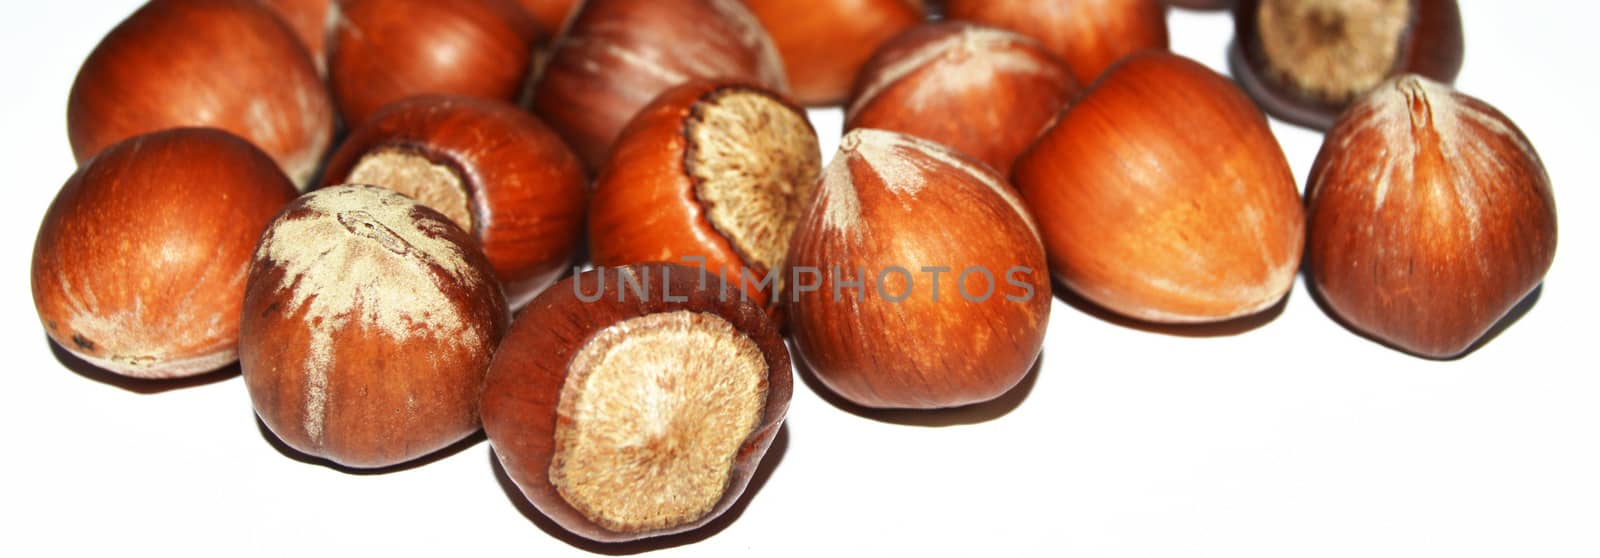 The new fresh shelled nuts pictures